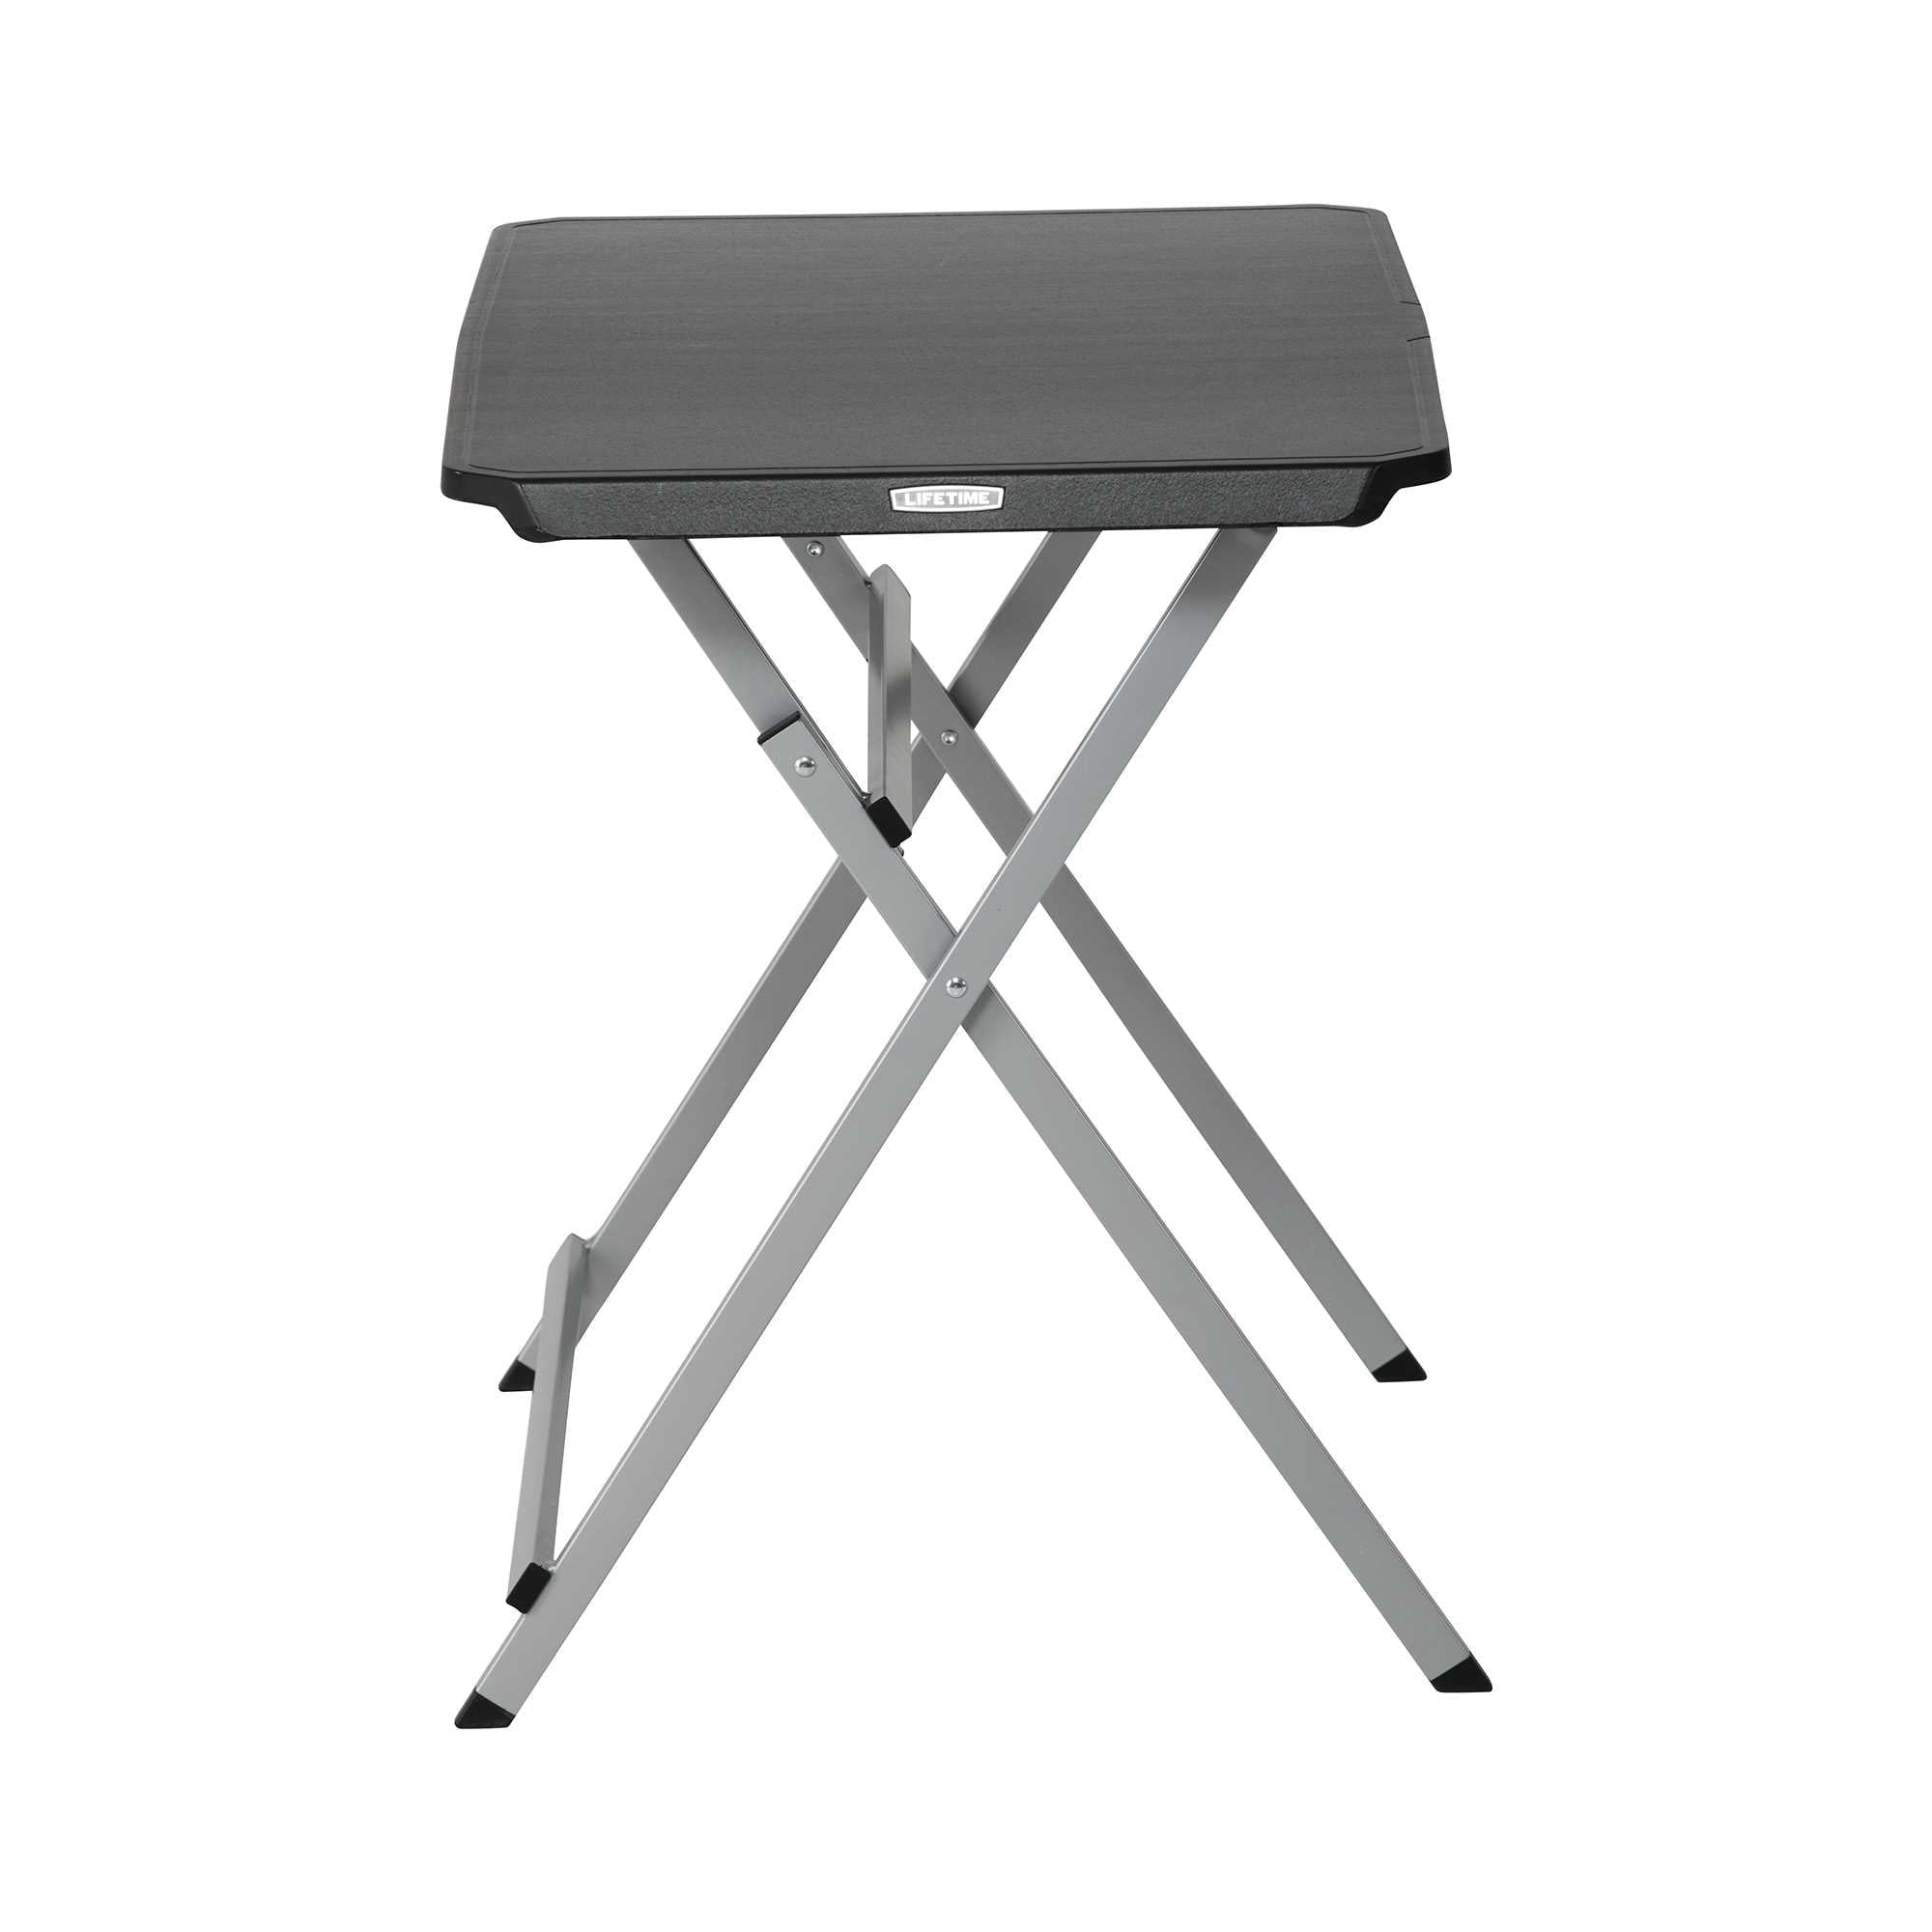 Lifetime 30-Inch Personal Folding Tray Table (Light Commercial), 80623